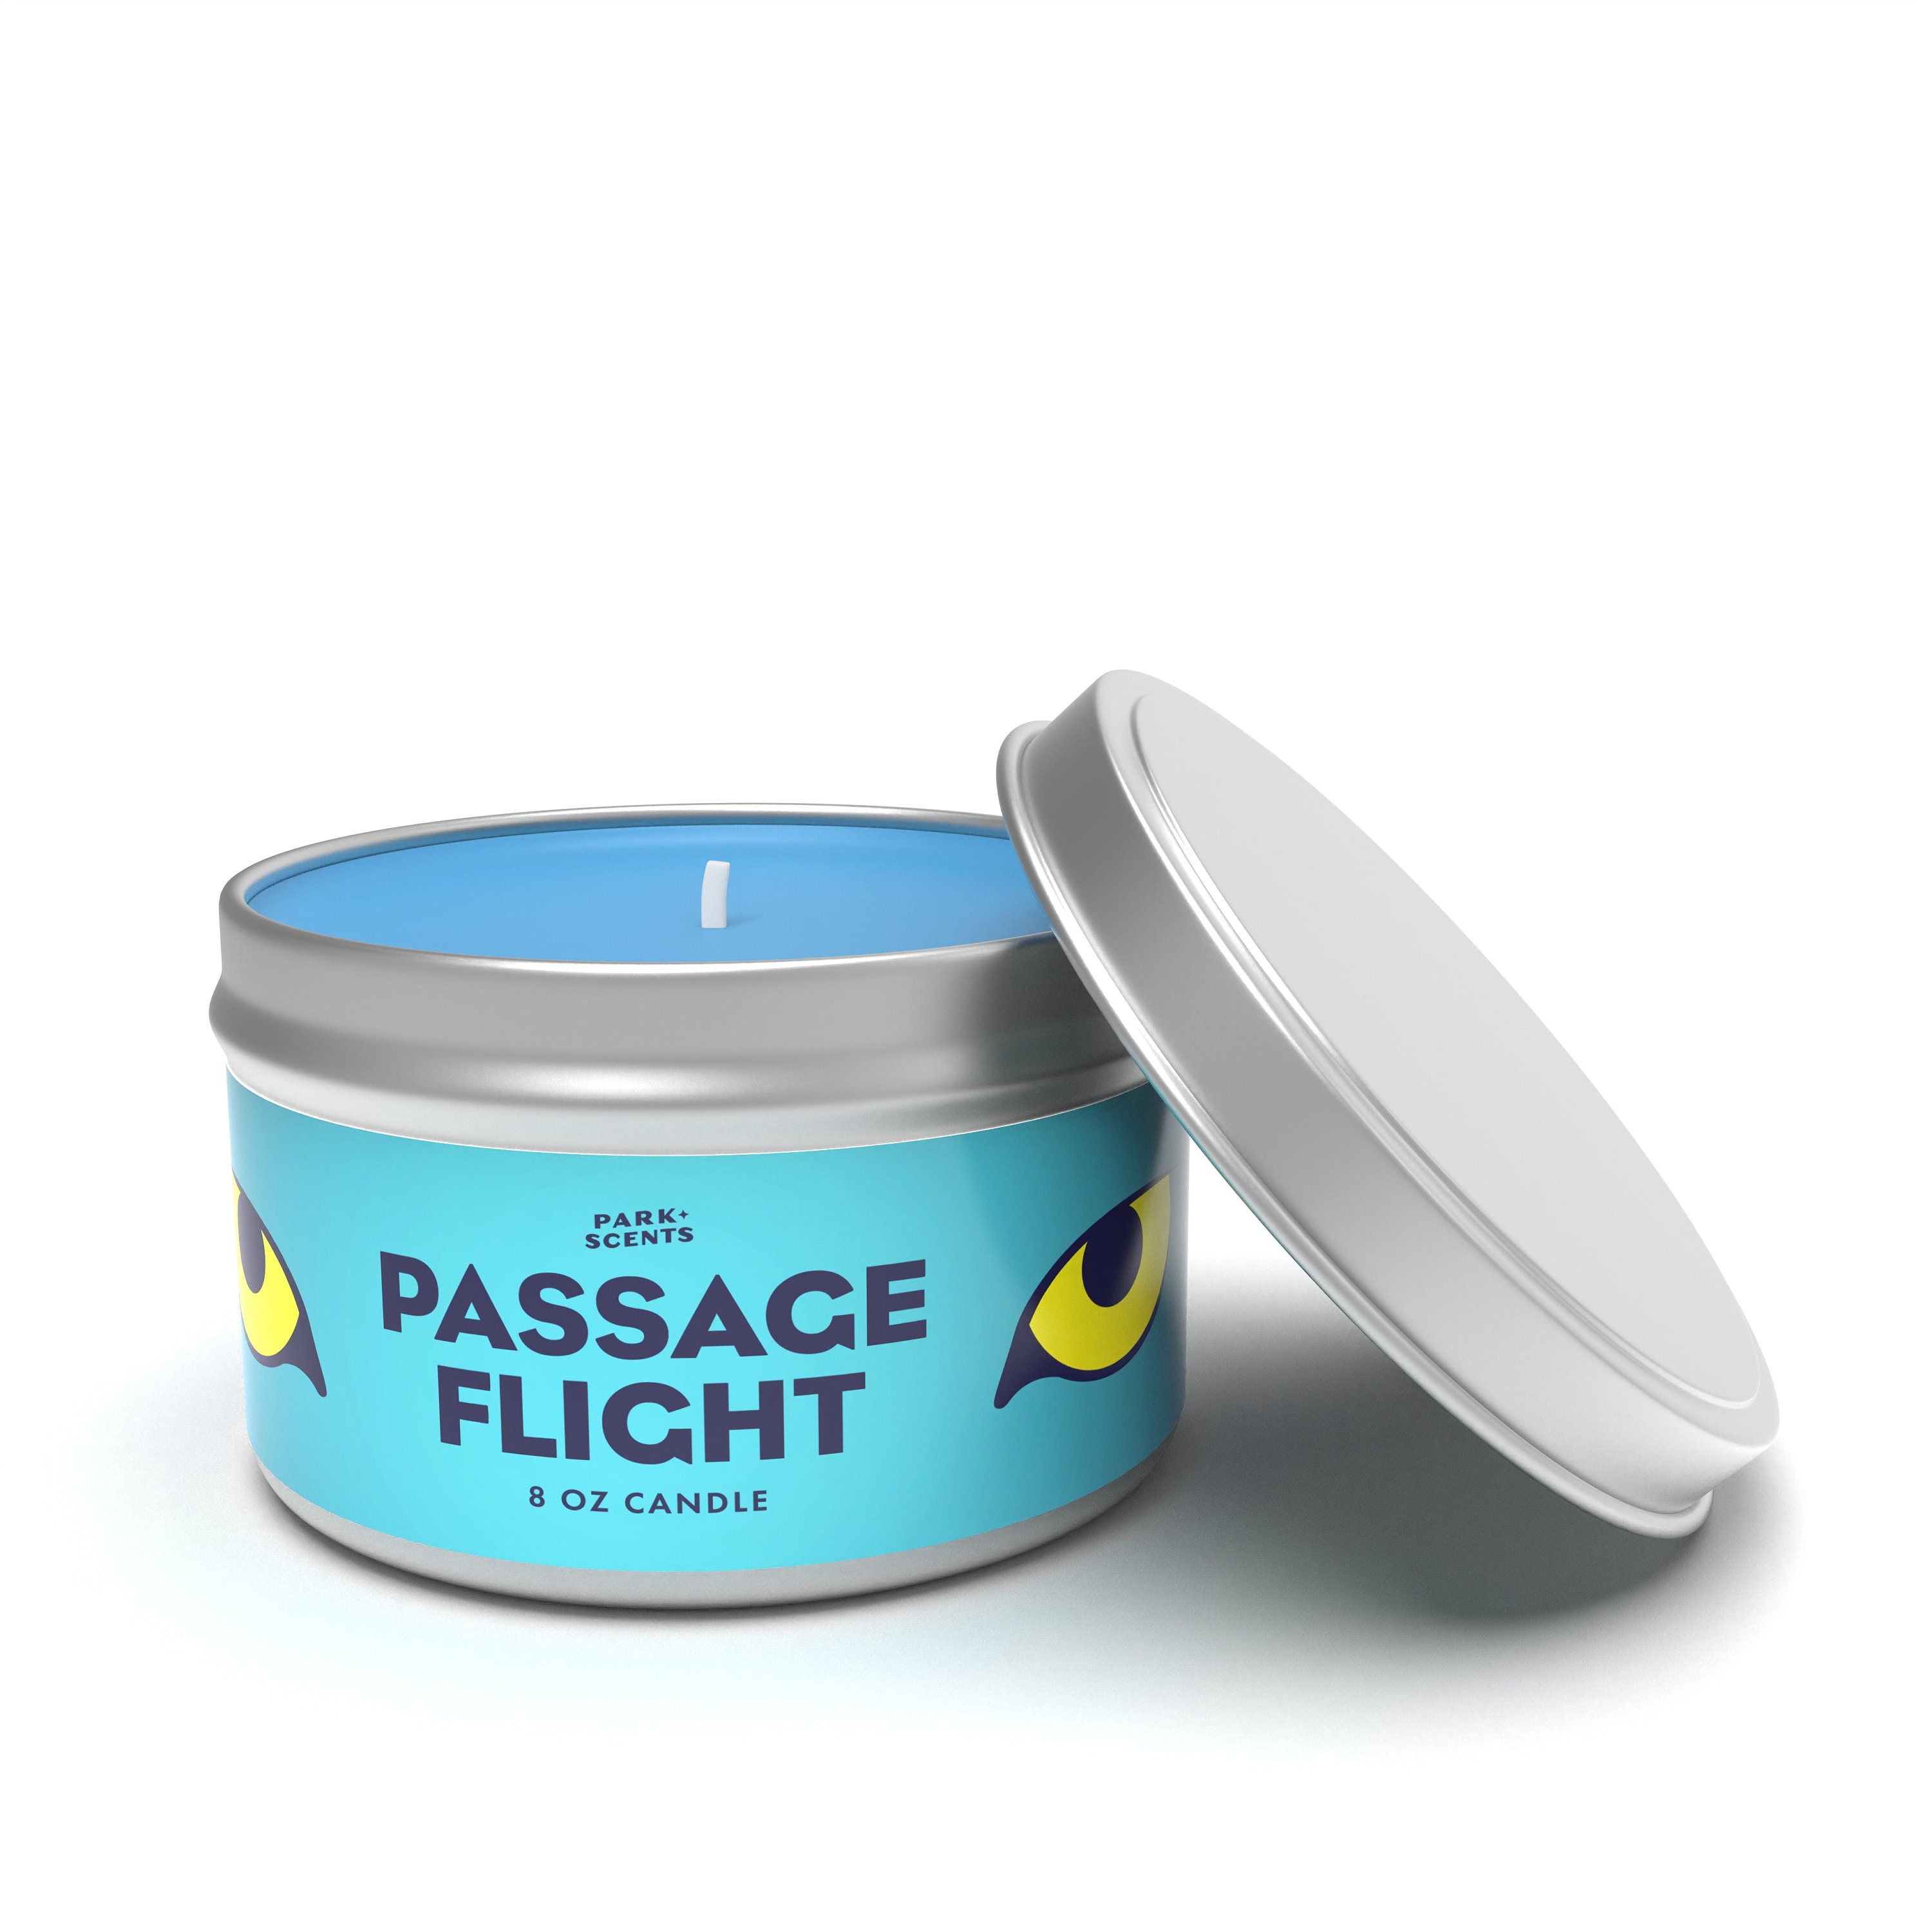 Park Scents Passage Flight Candle Super Accurate Smell of the Ocean Scene  in Flight of Passage Ride Handmade in the USA 